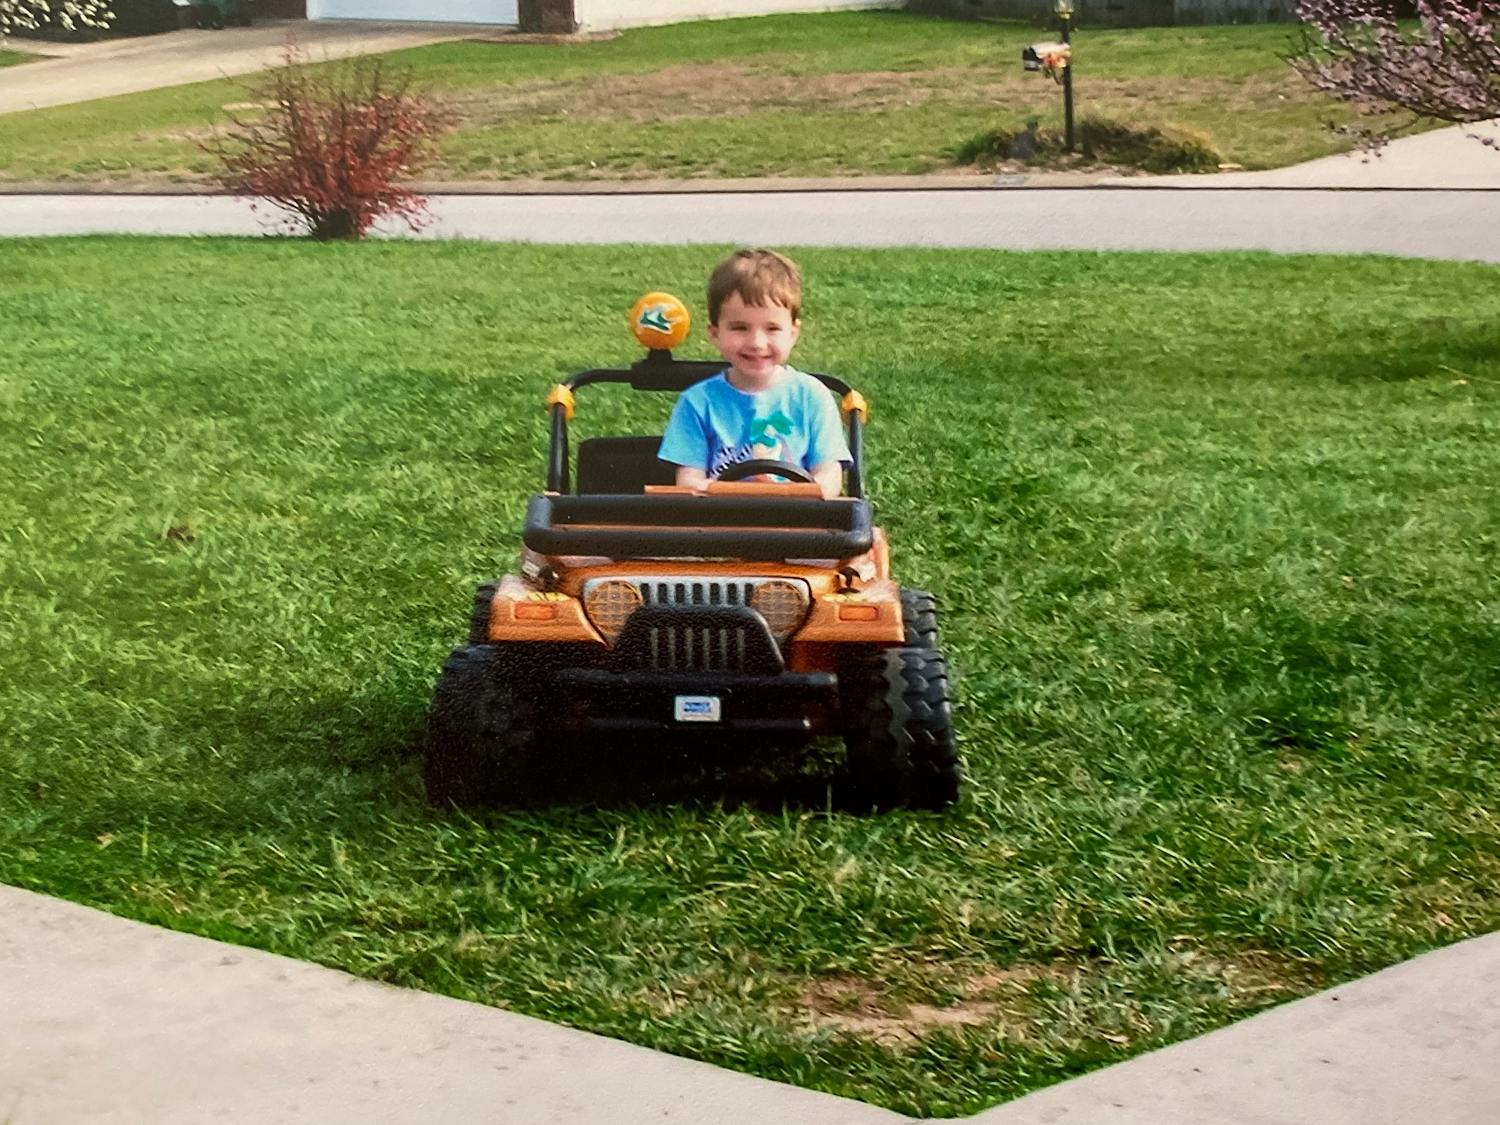 A young Preston Fore happily drives his toy Jeep through his yard.
Photo Courtesy of the Fore Family.